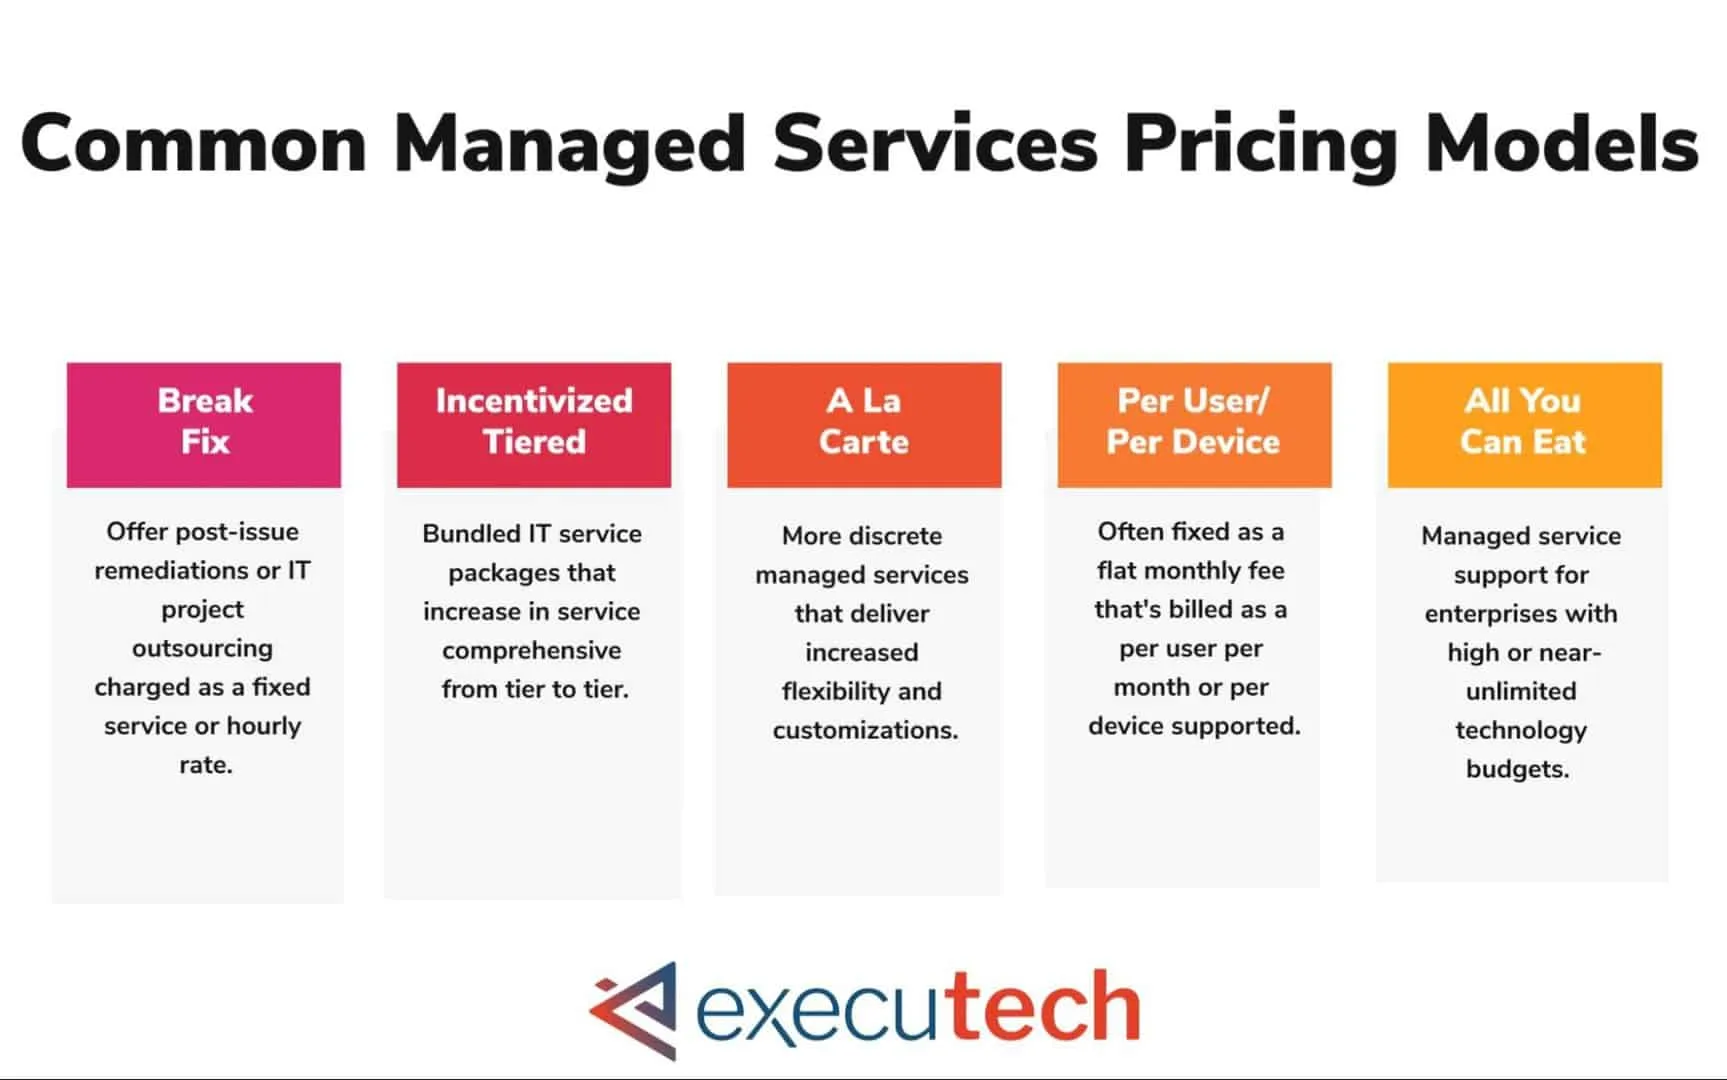 Managed IT Services Pricing